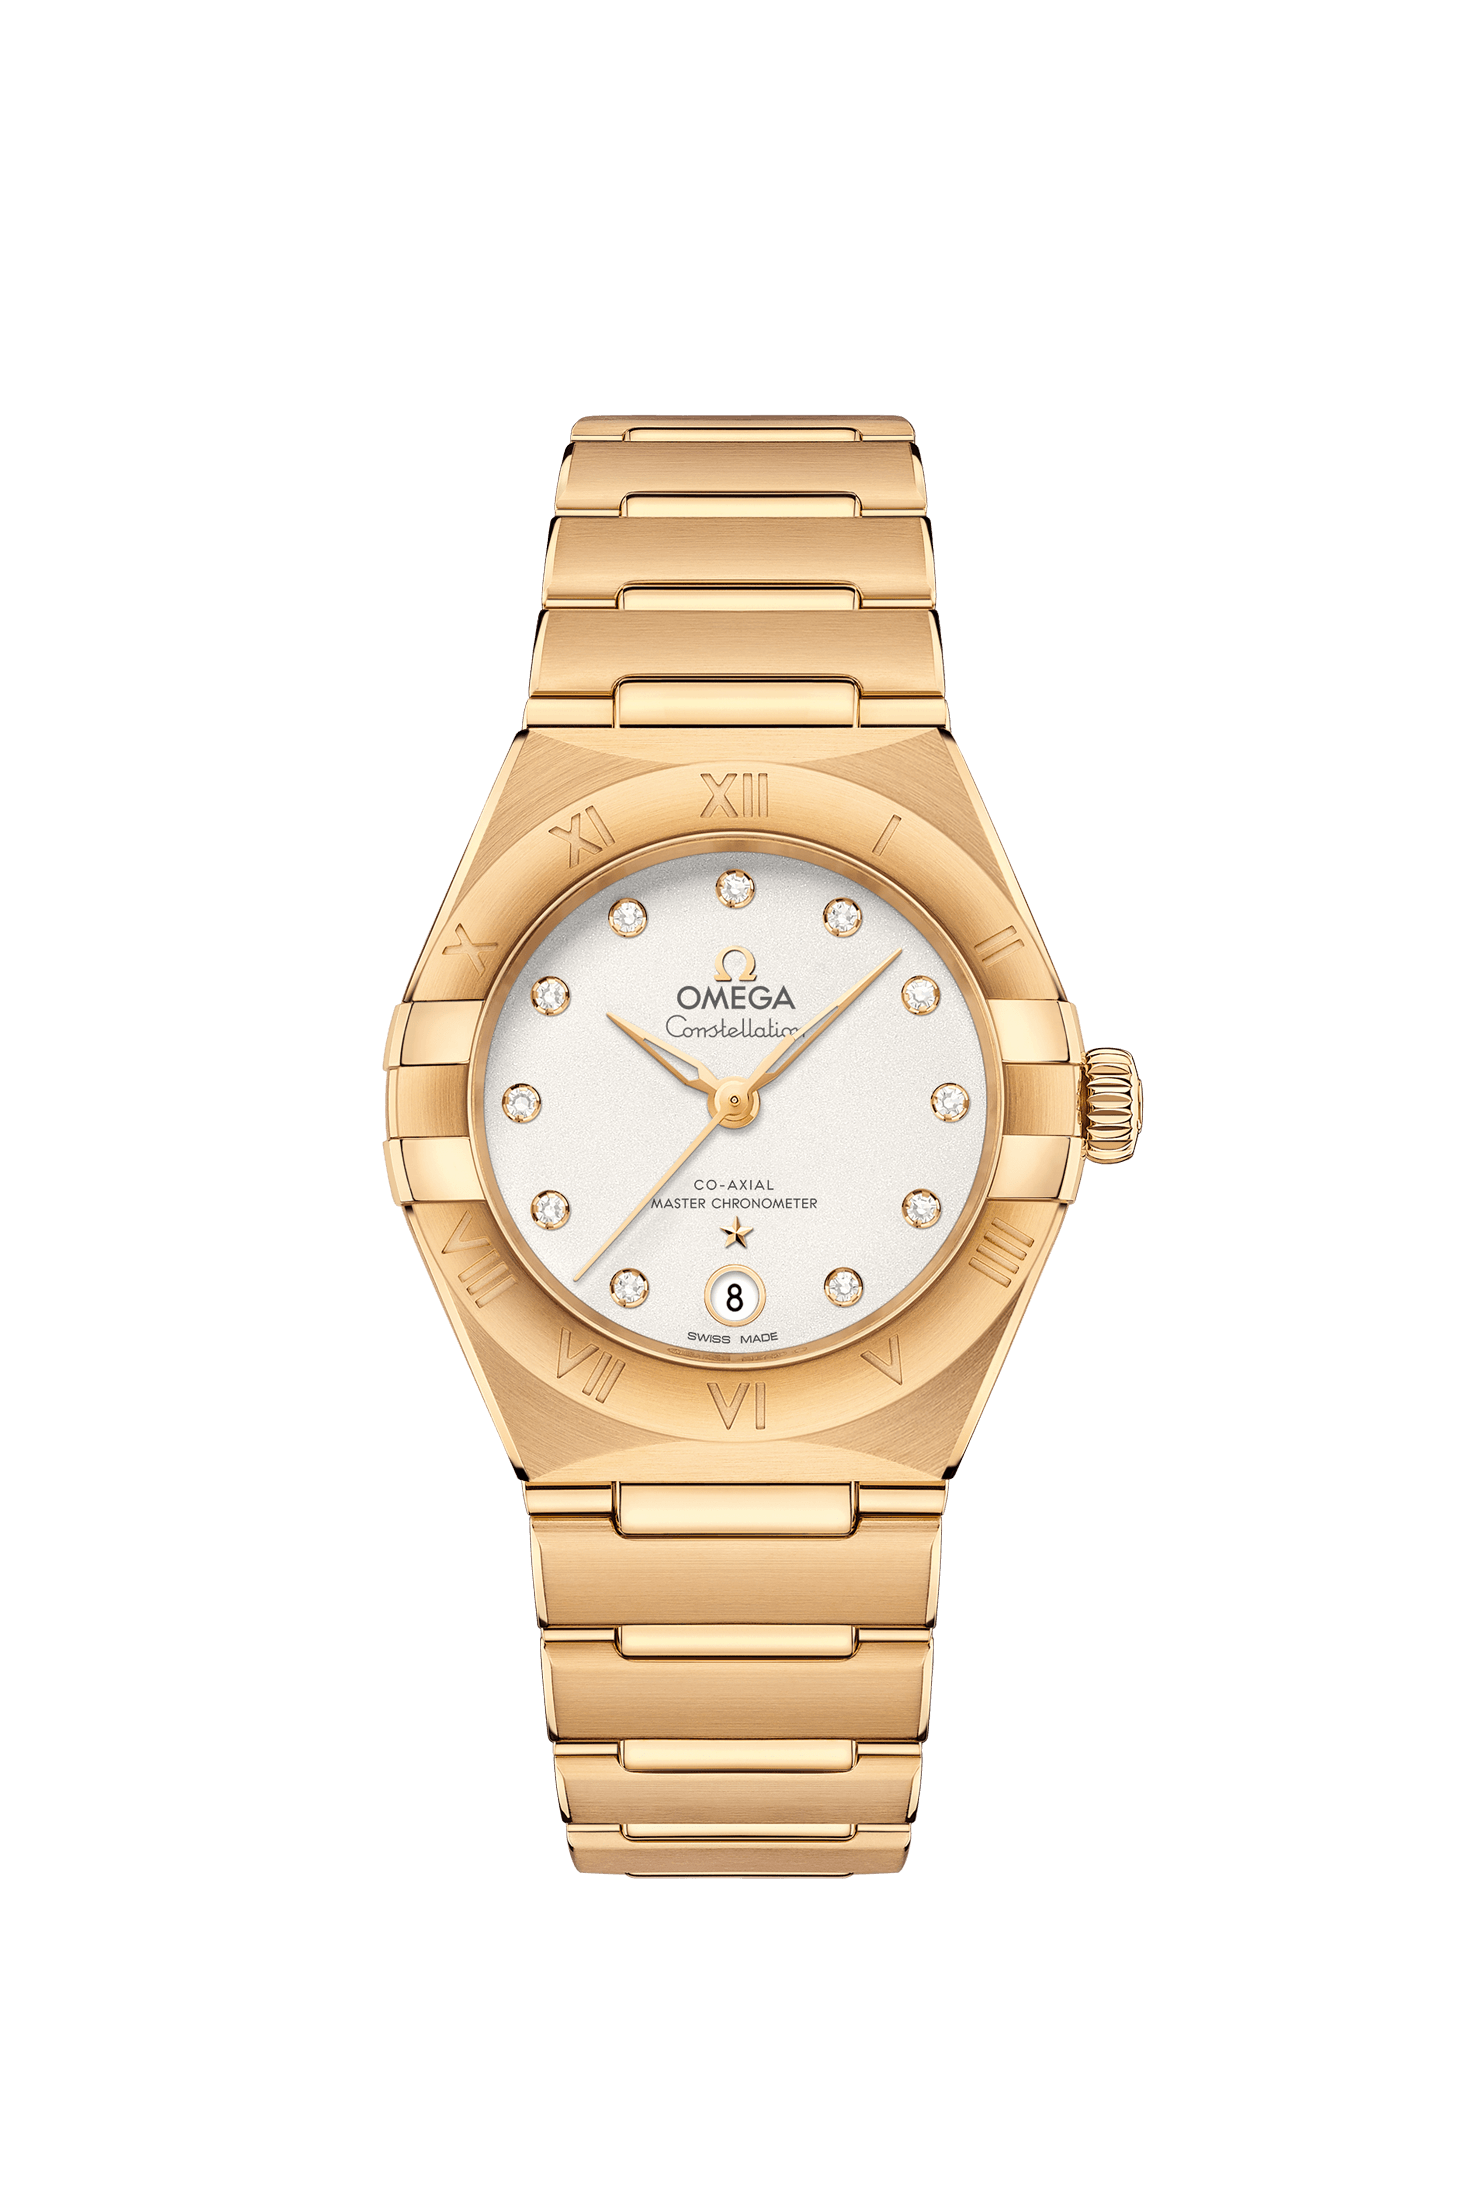 Ladies' watch  OMEGA, Constellation Co Axial Master Chronometer / 29mm, SKU: 131.50.29.20.52.002 | watchapproach.com